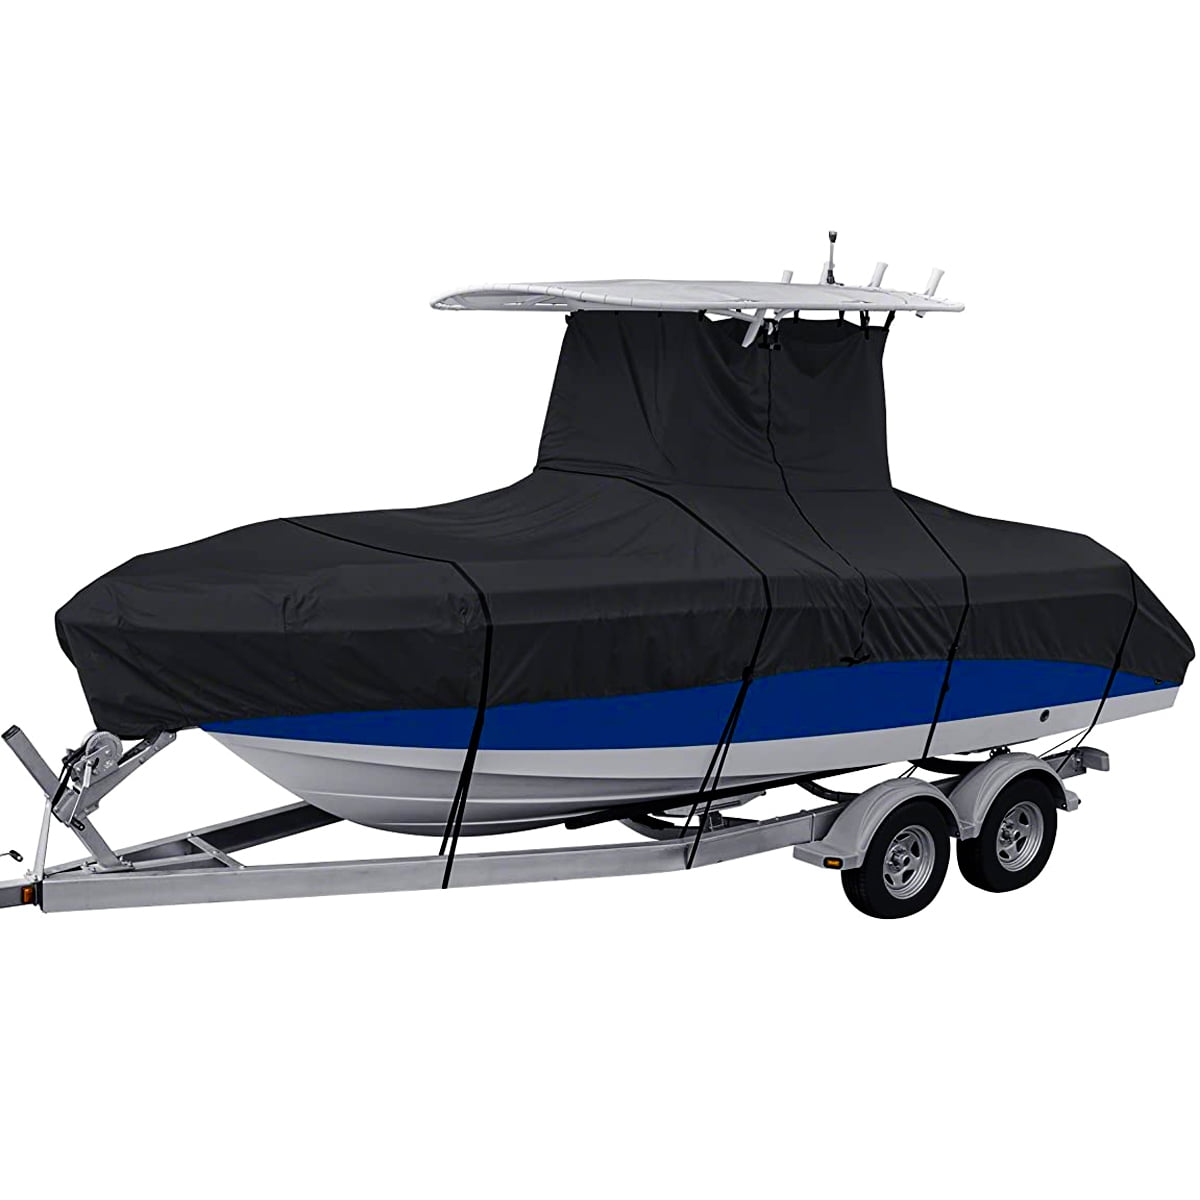 Heavy duty Trailerable Pontoon boat storage cover Fits 17' 18' 19' 20' L Navy 